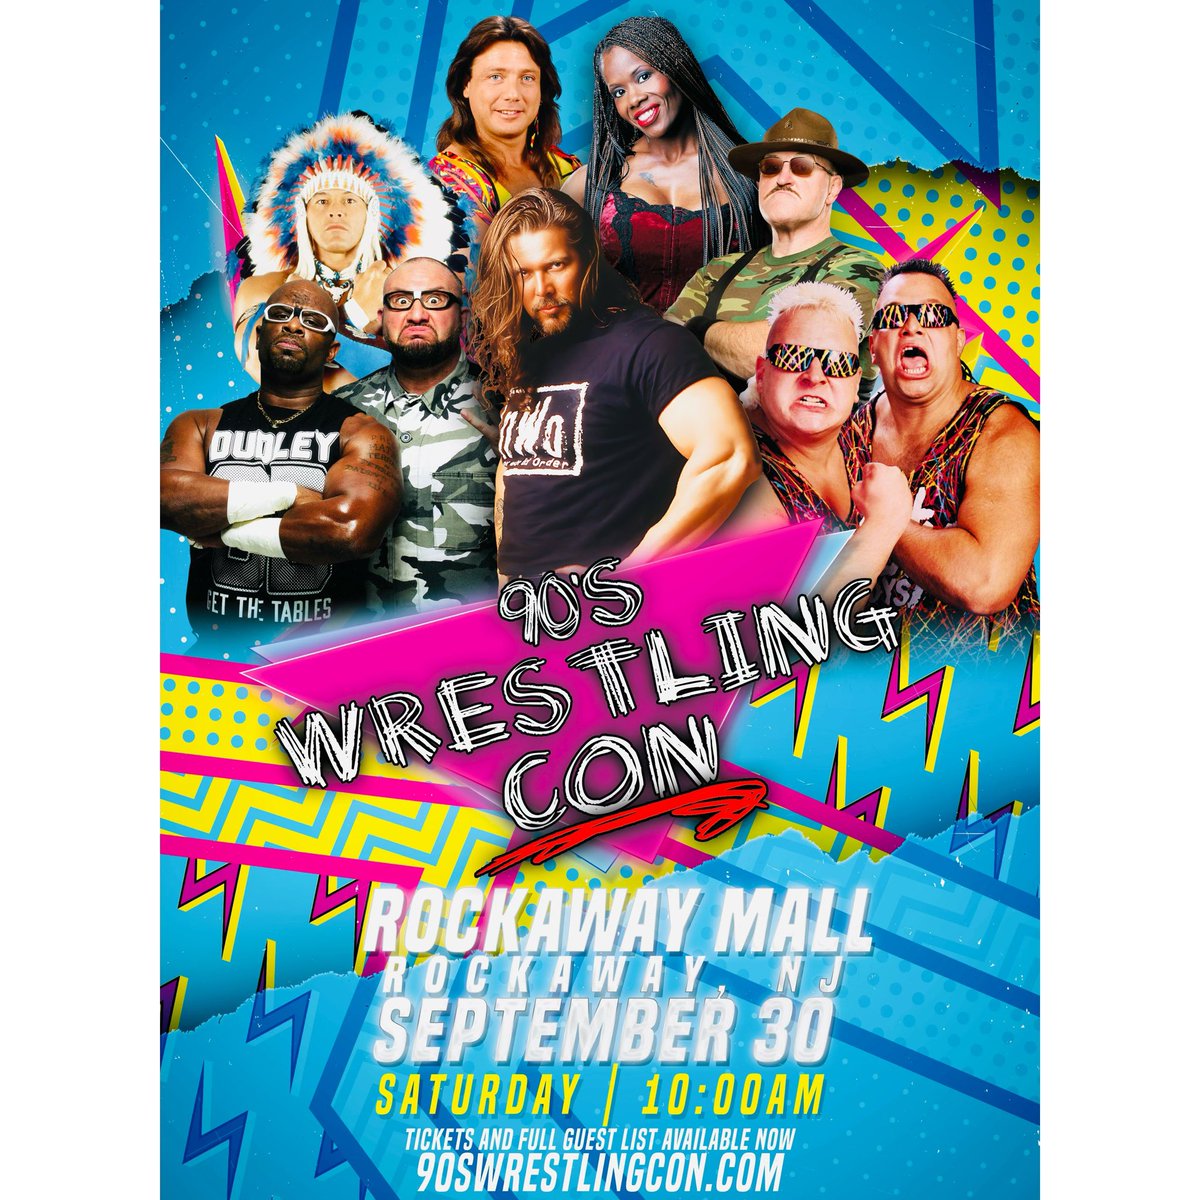 Some of the biggest Superstars from 90s Wrestling are headed to 90s Wrestling Con on Saturday, September 30th at The Rockaway Mall in Rockaway, NJ!!! More names to be announced soon! Tickets are available now at: 90sWrestlingCon.com